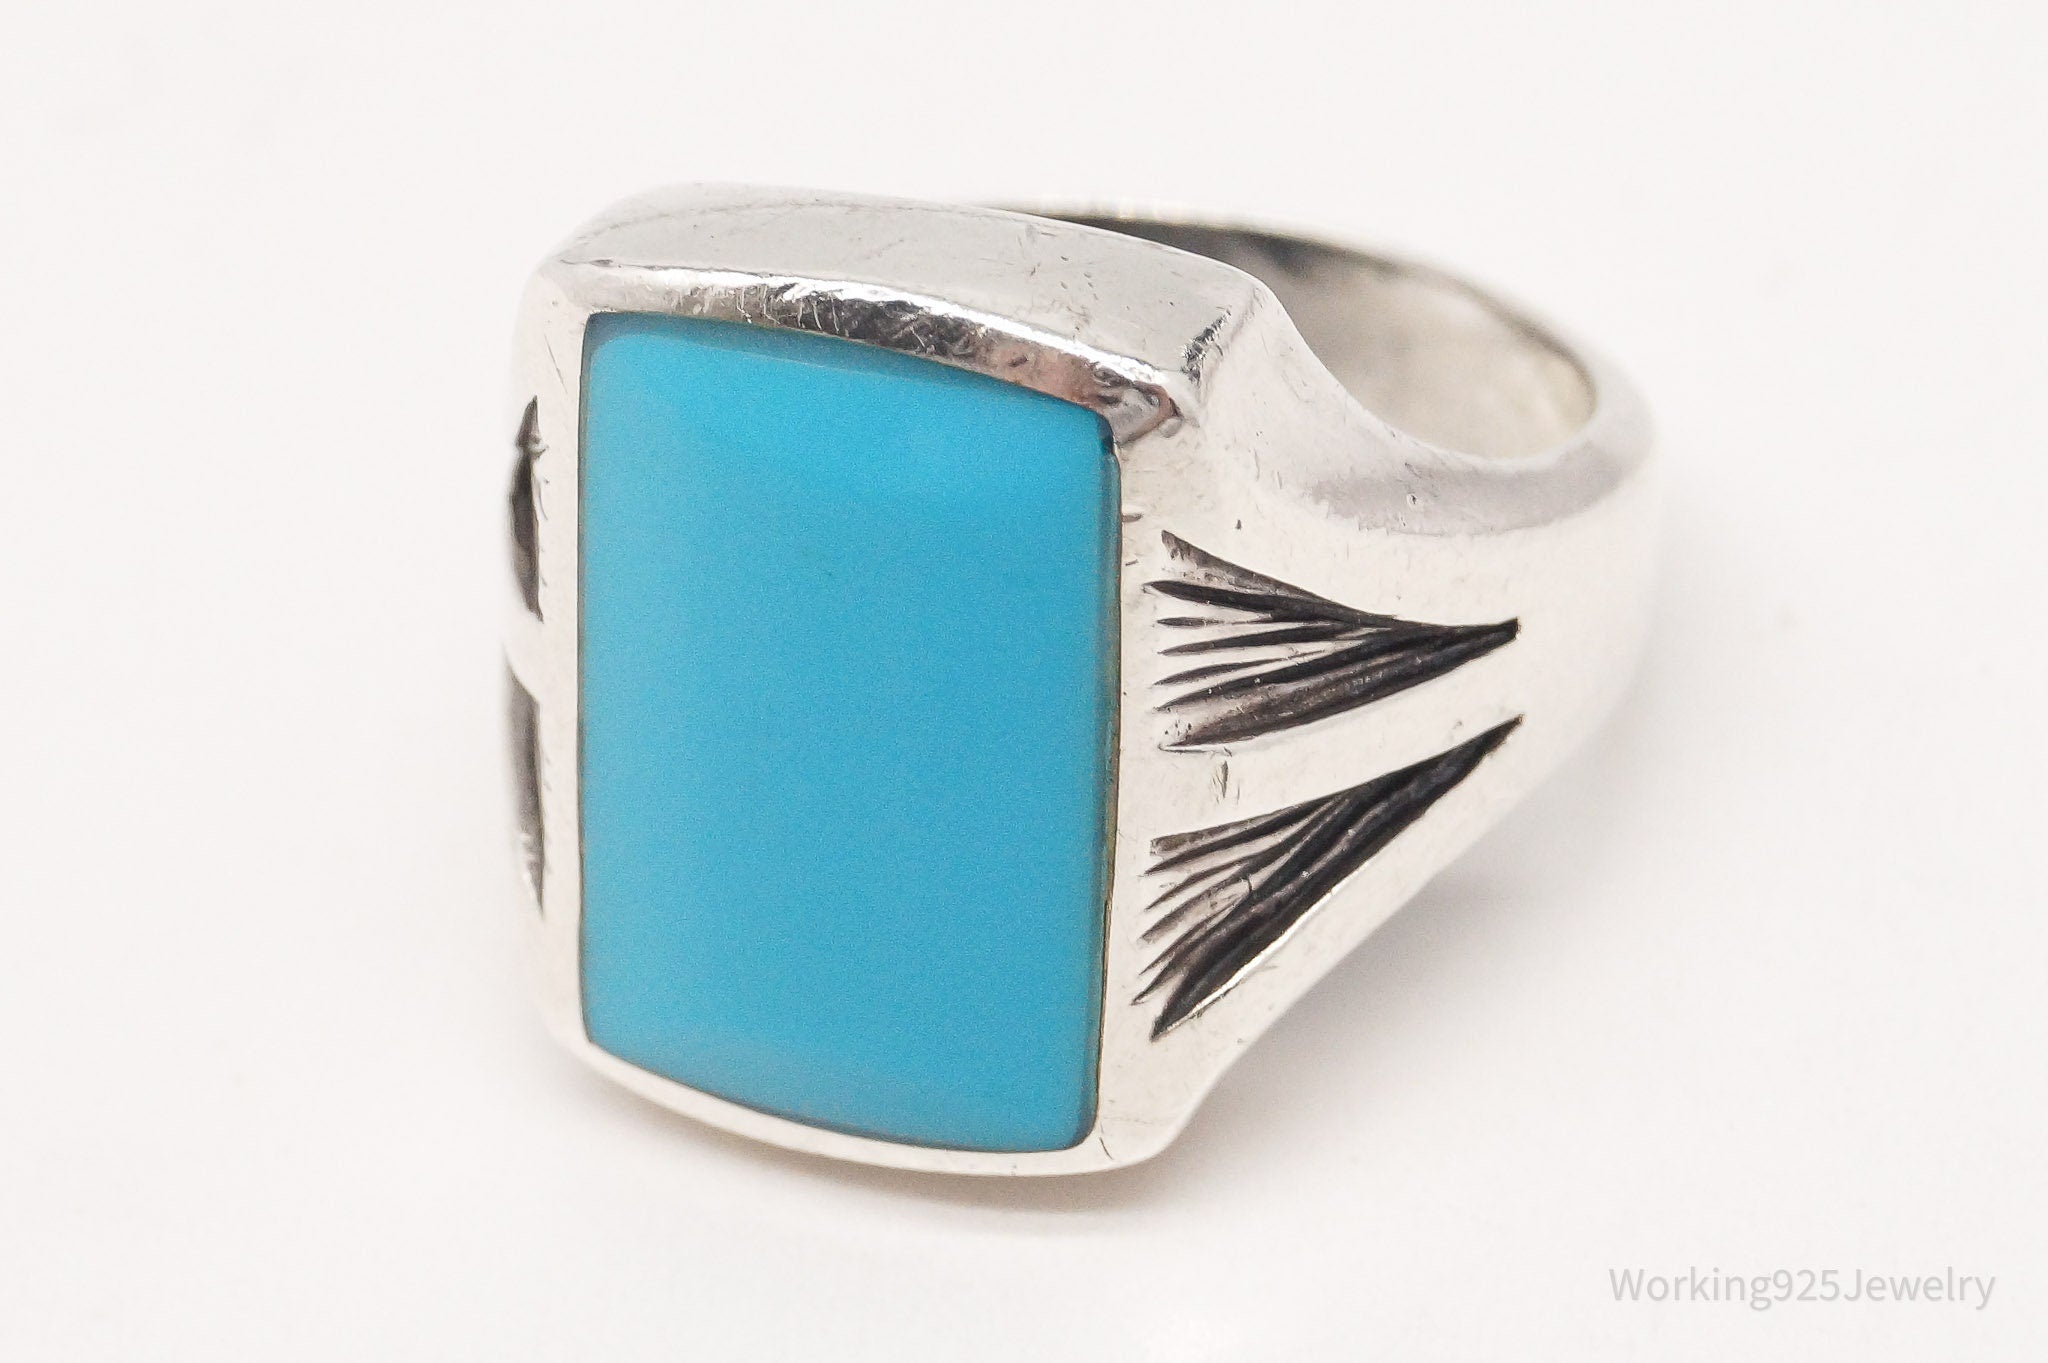 Vintage Native American Blue Turquoise Sterling Silver Ring - Size 8.5